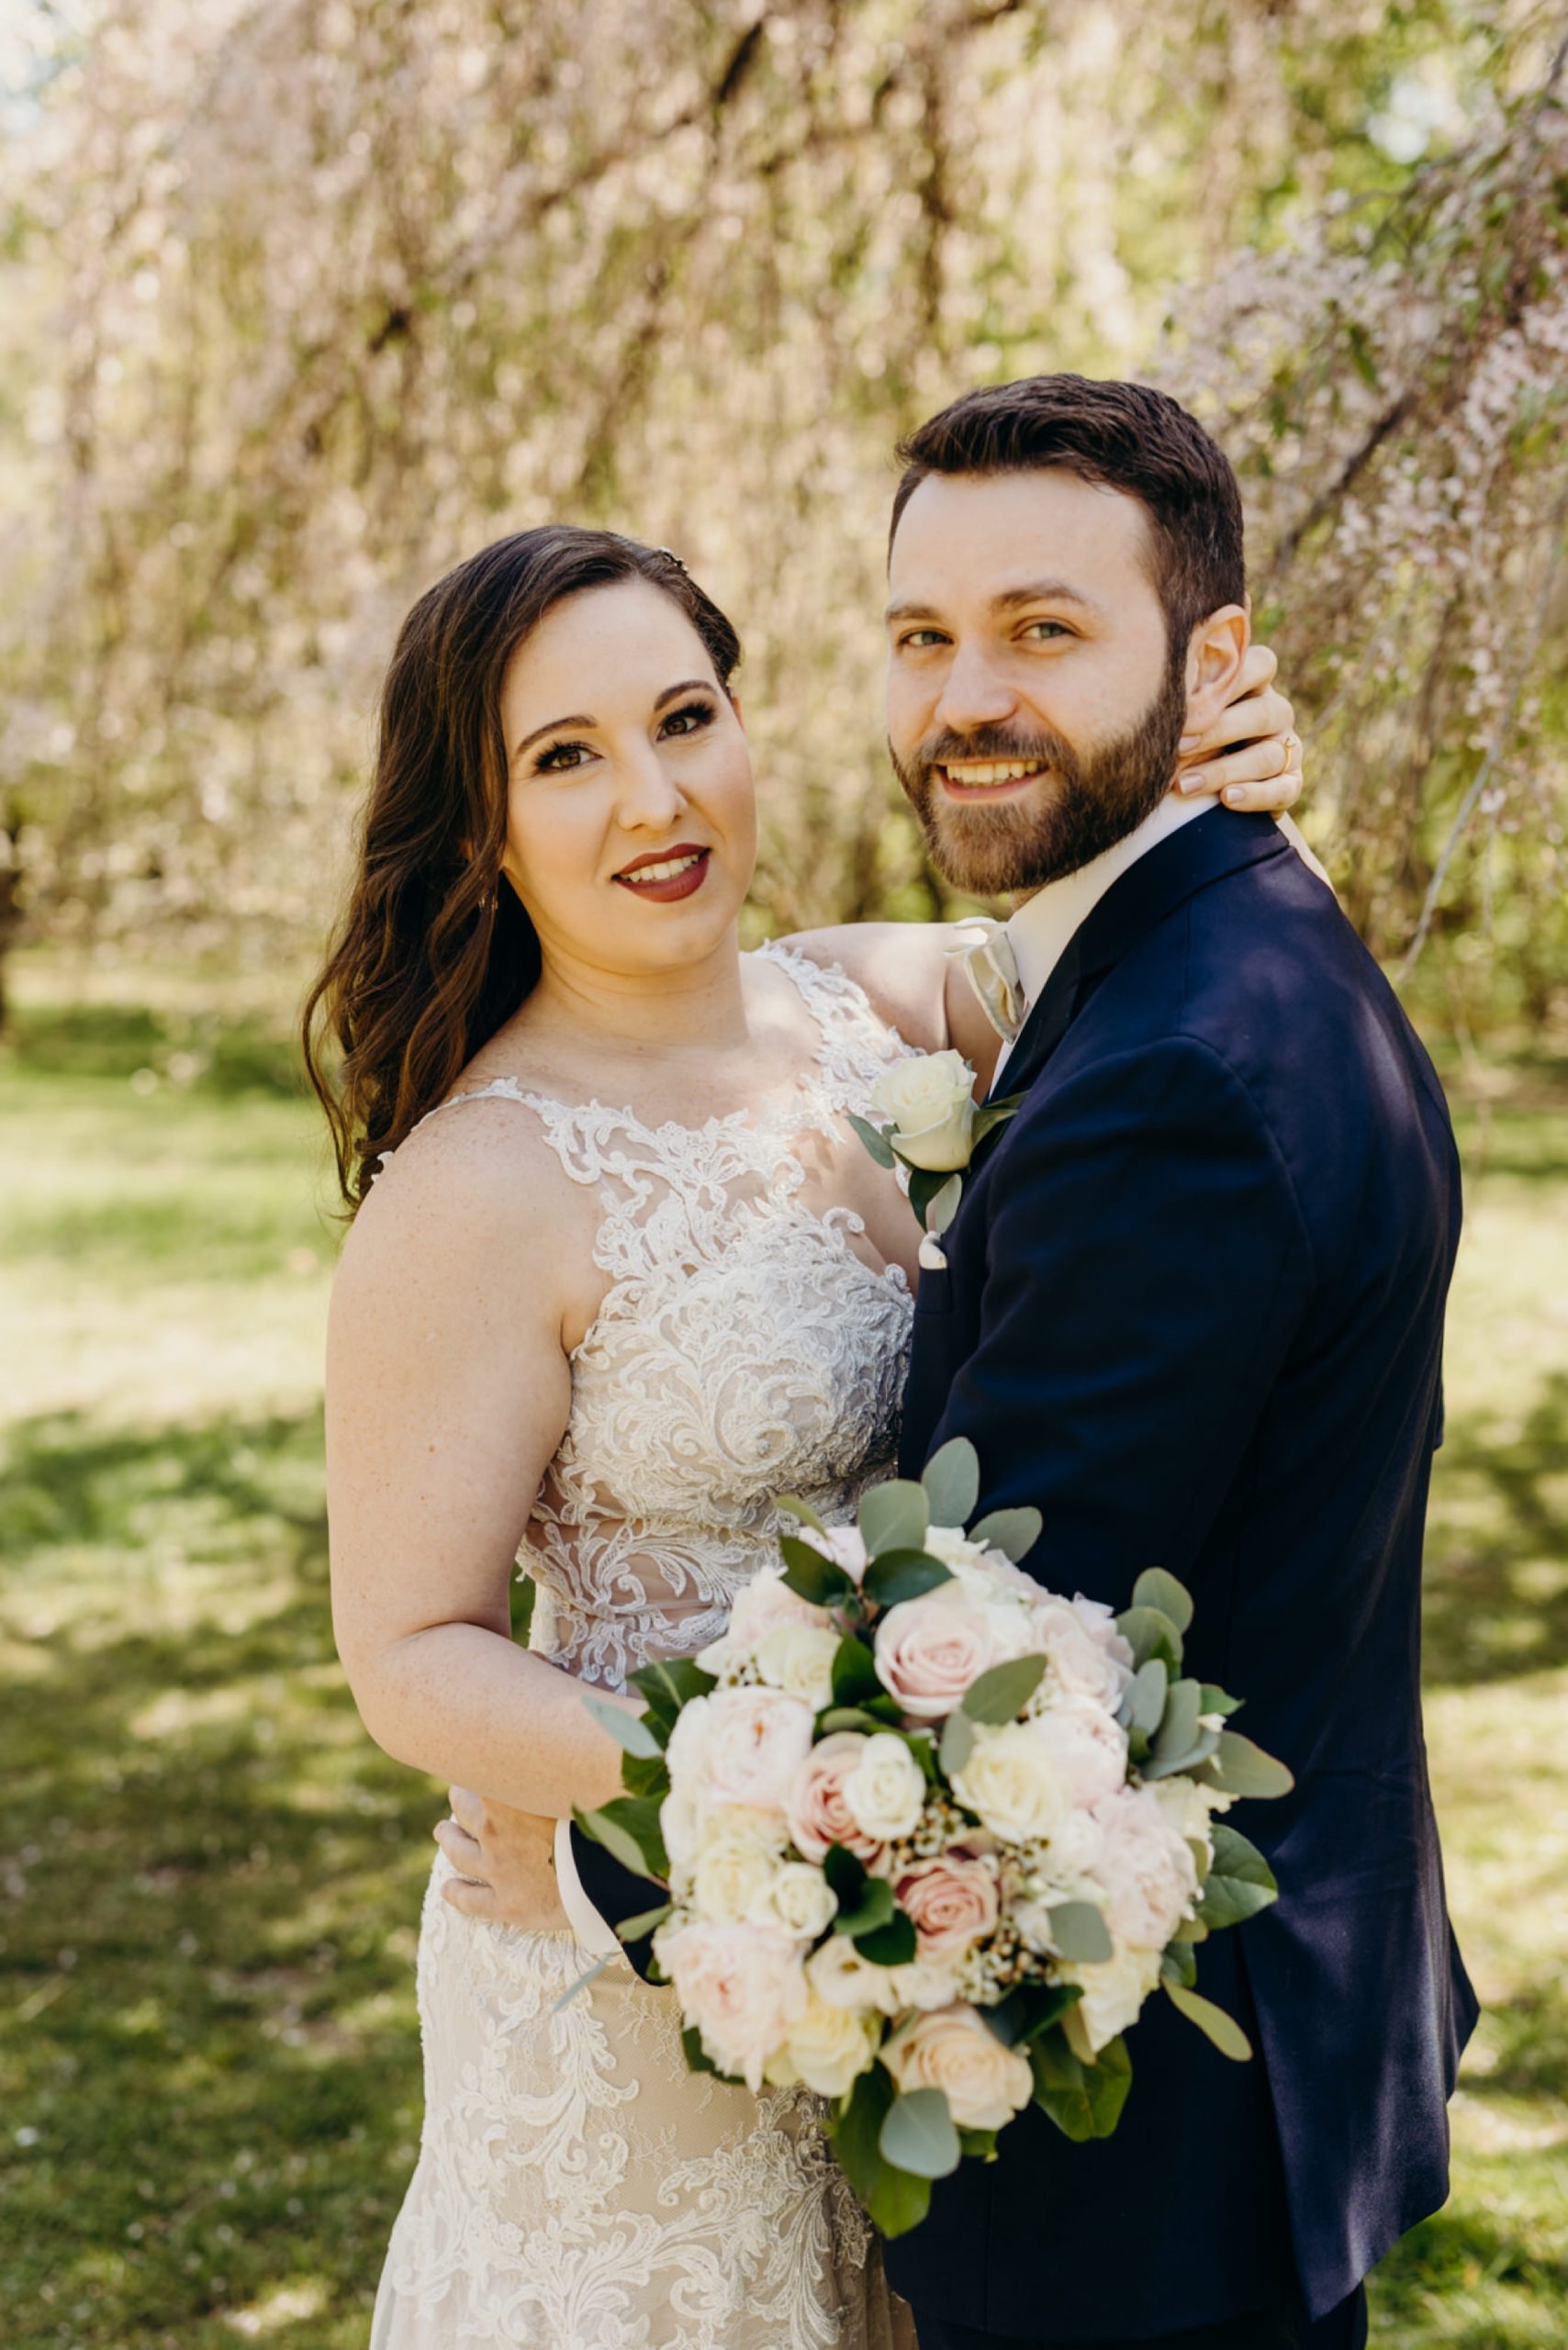 portrait of a bride and groom at a park in new jersey